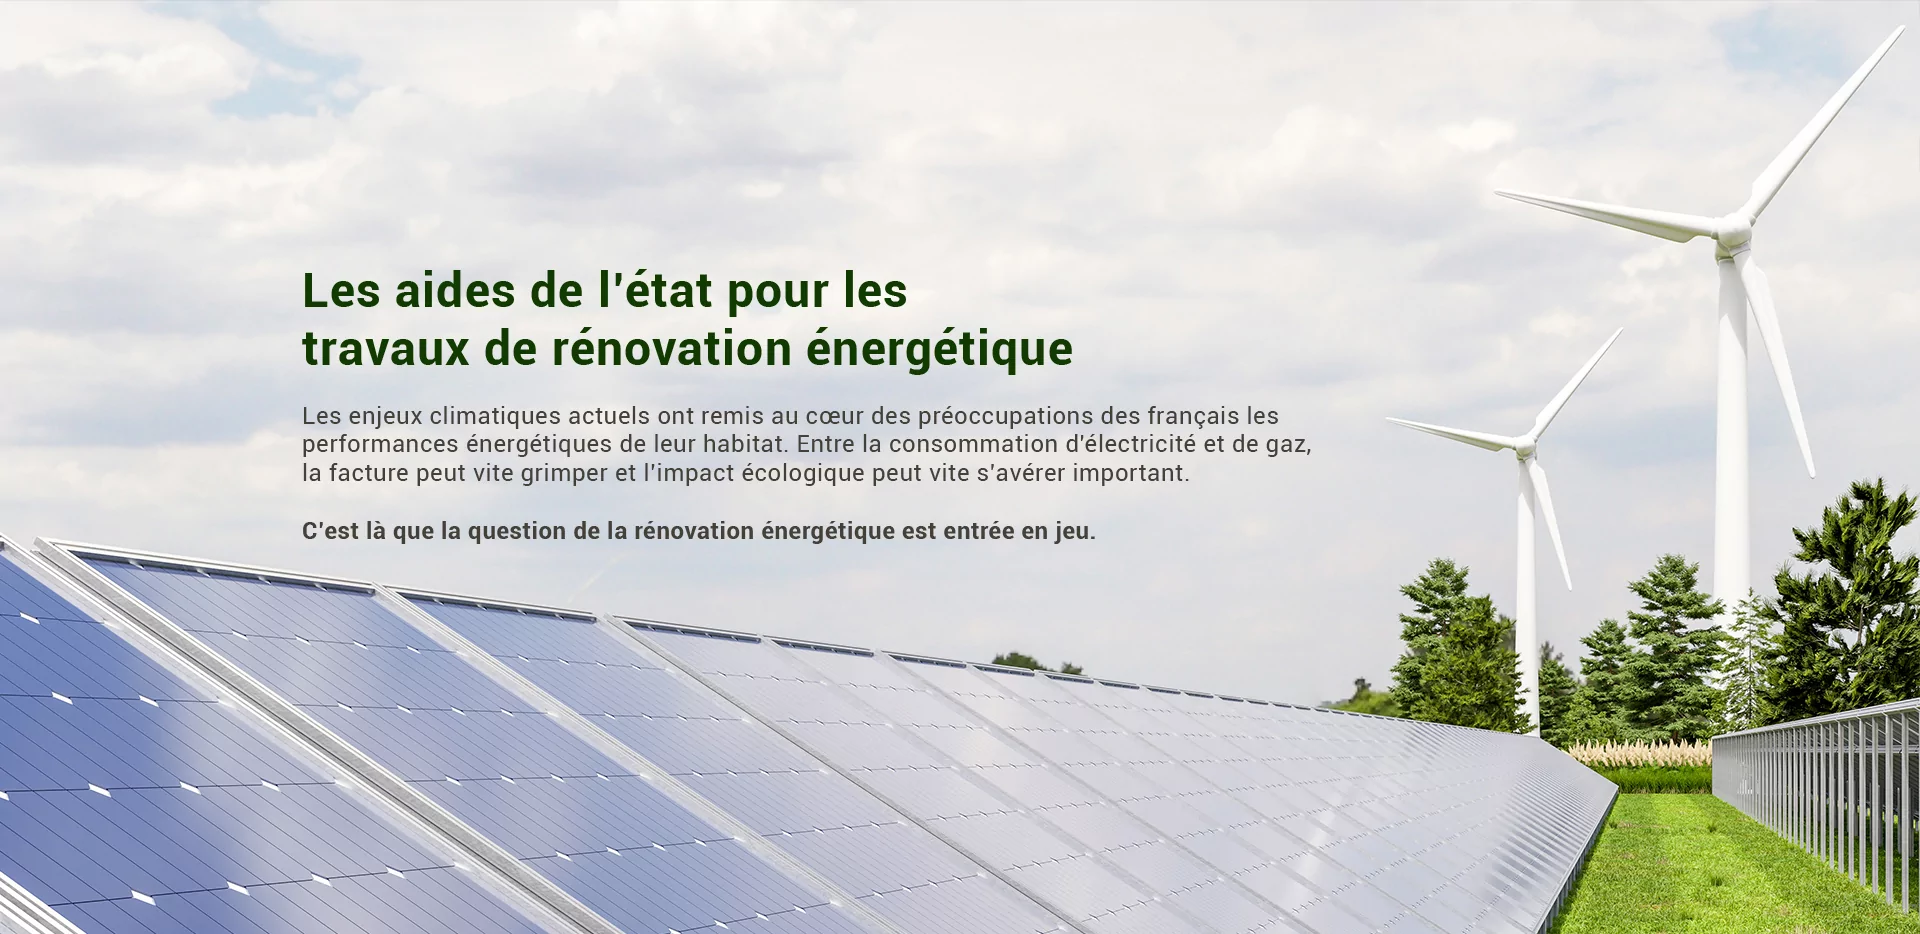 Installateur Panneaux Solaires Mitry Mory 77290